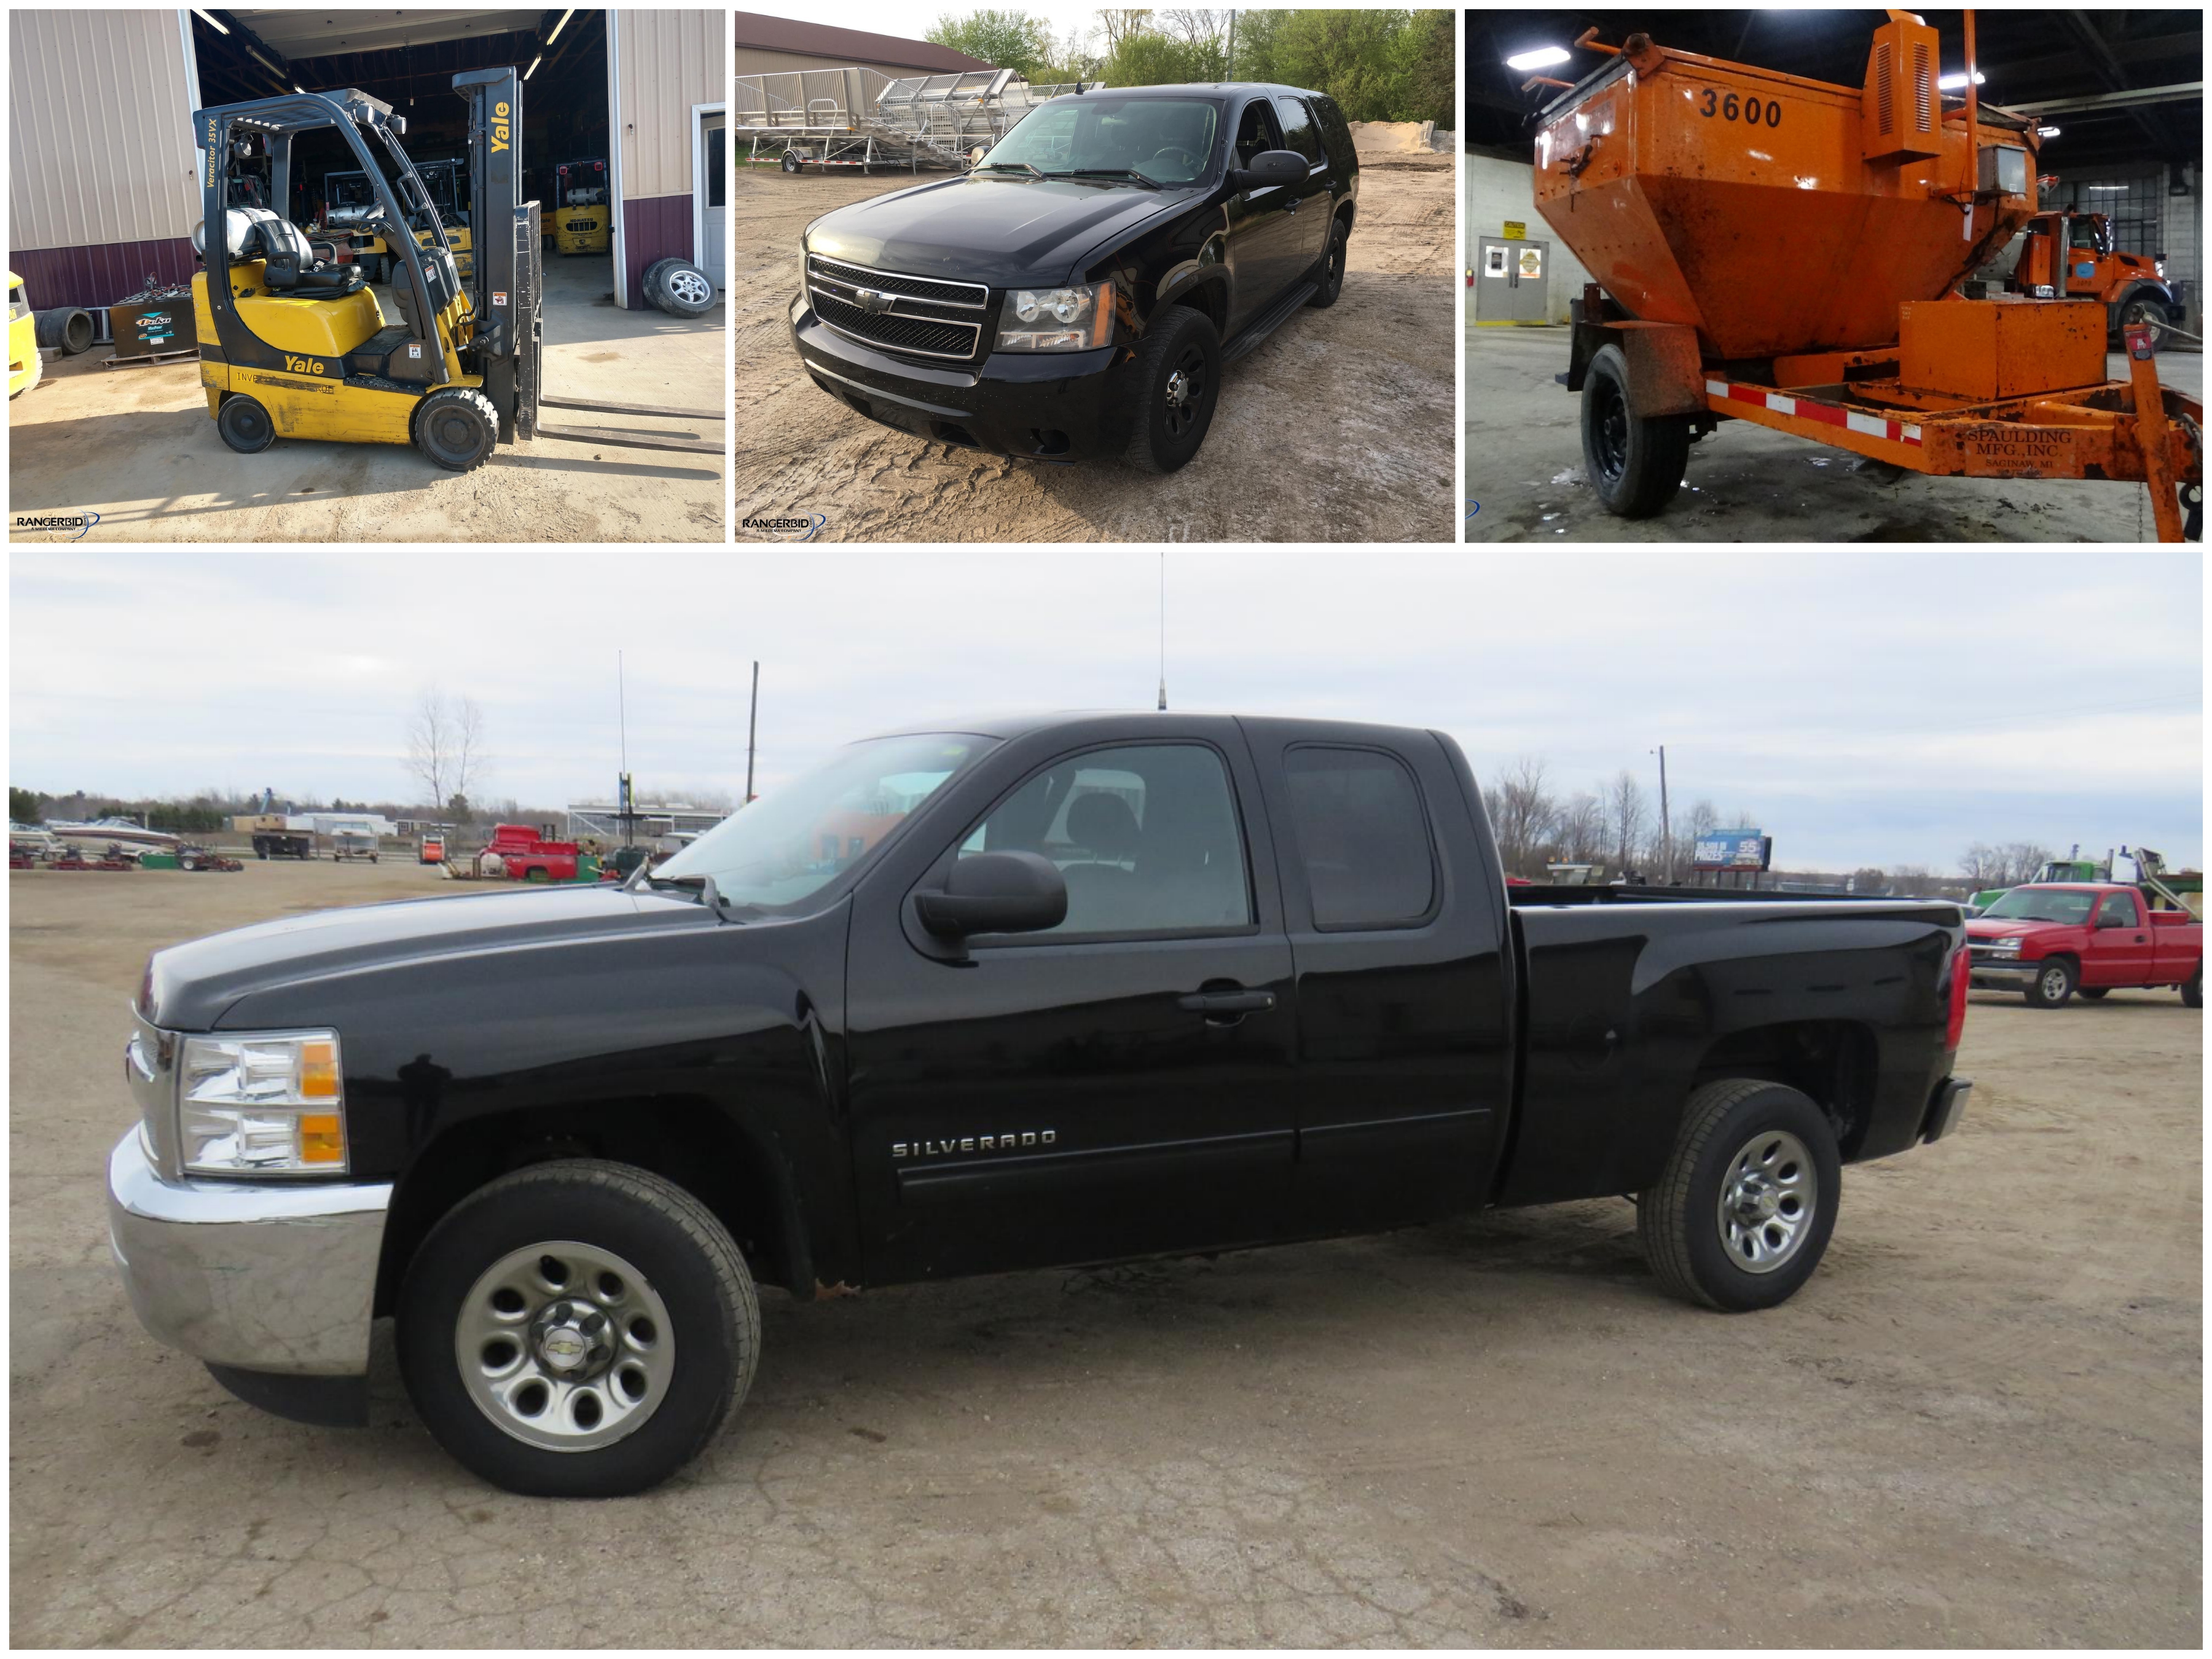 Municipality & Consignment Online Auction: Tuesday, June 19!